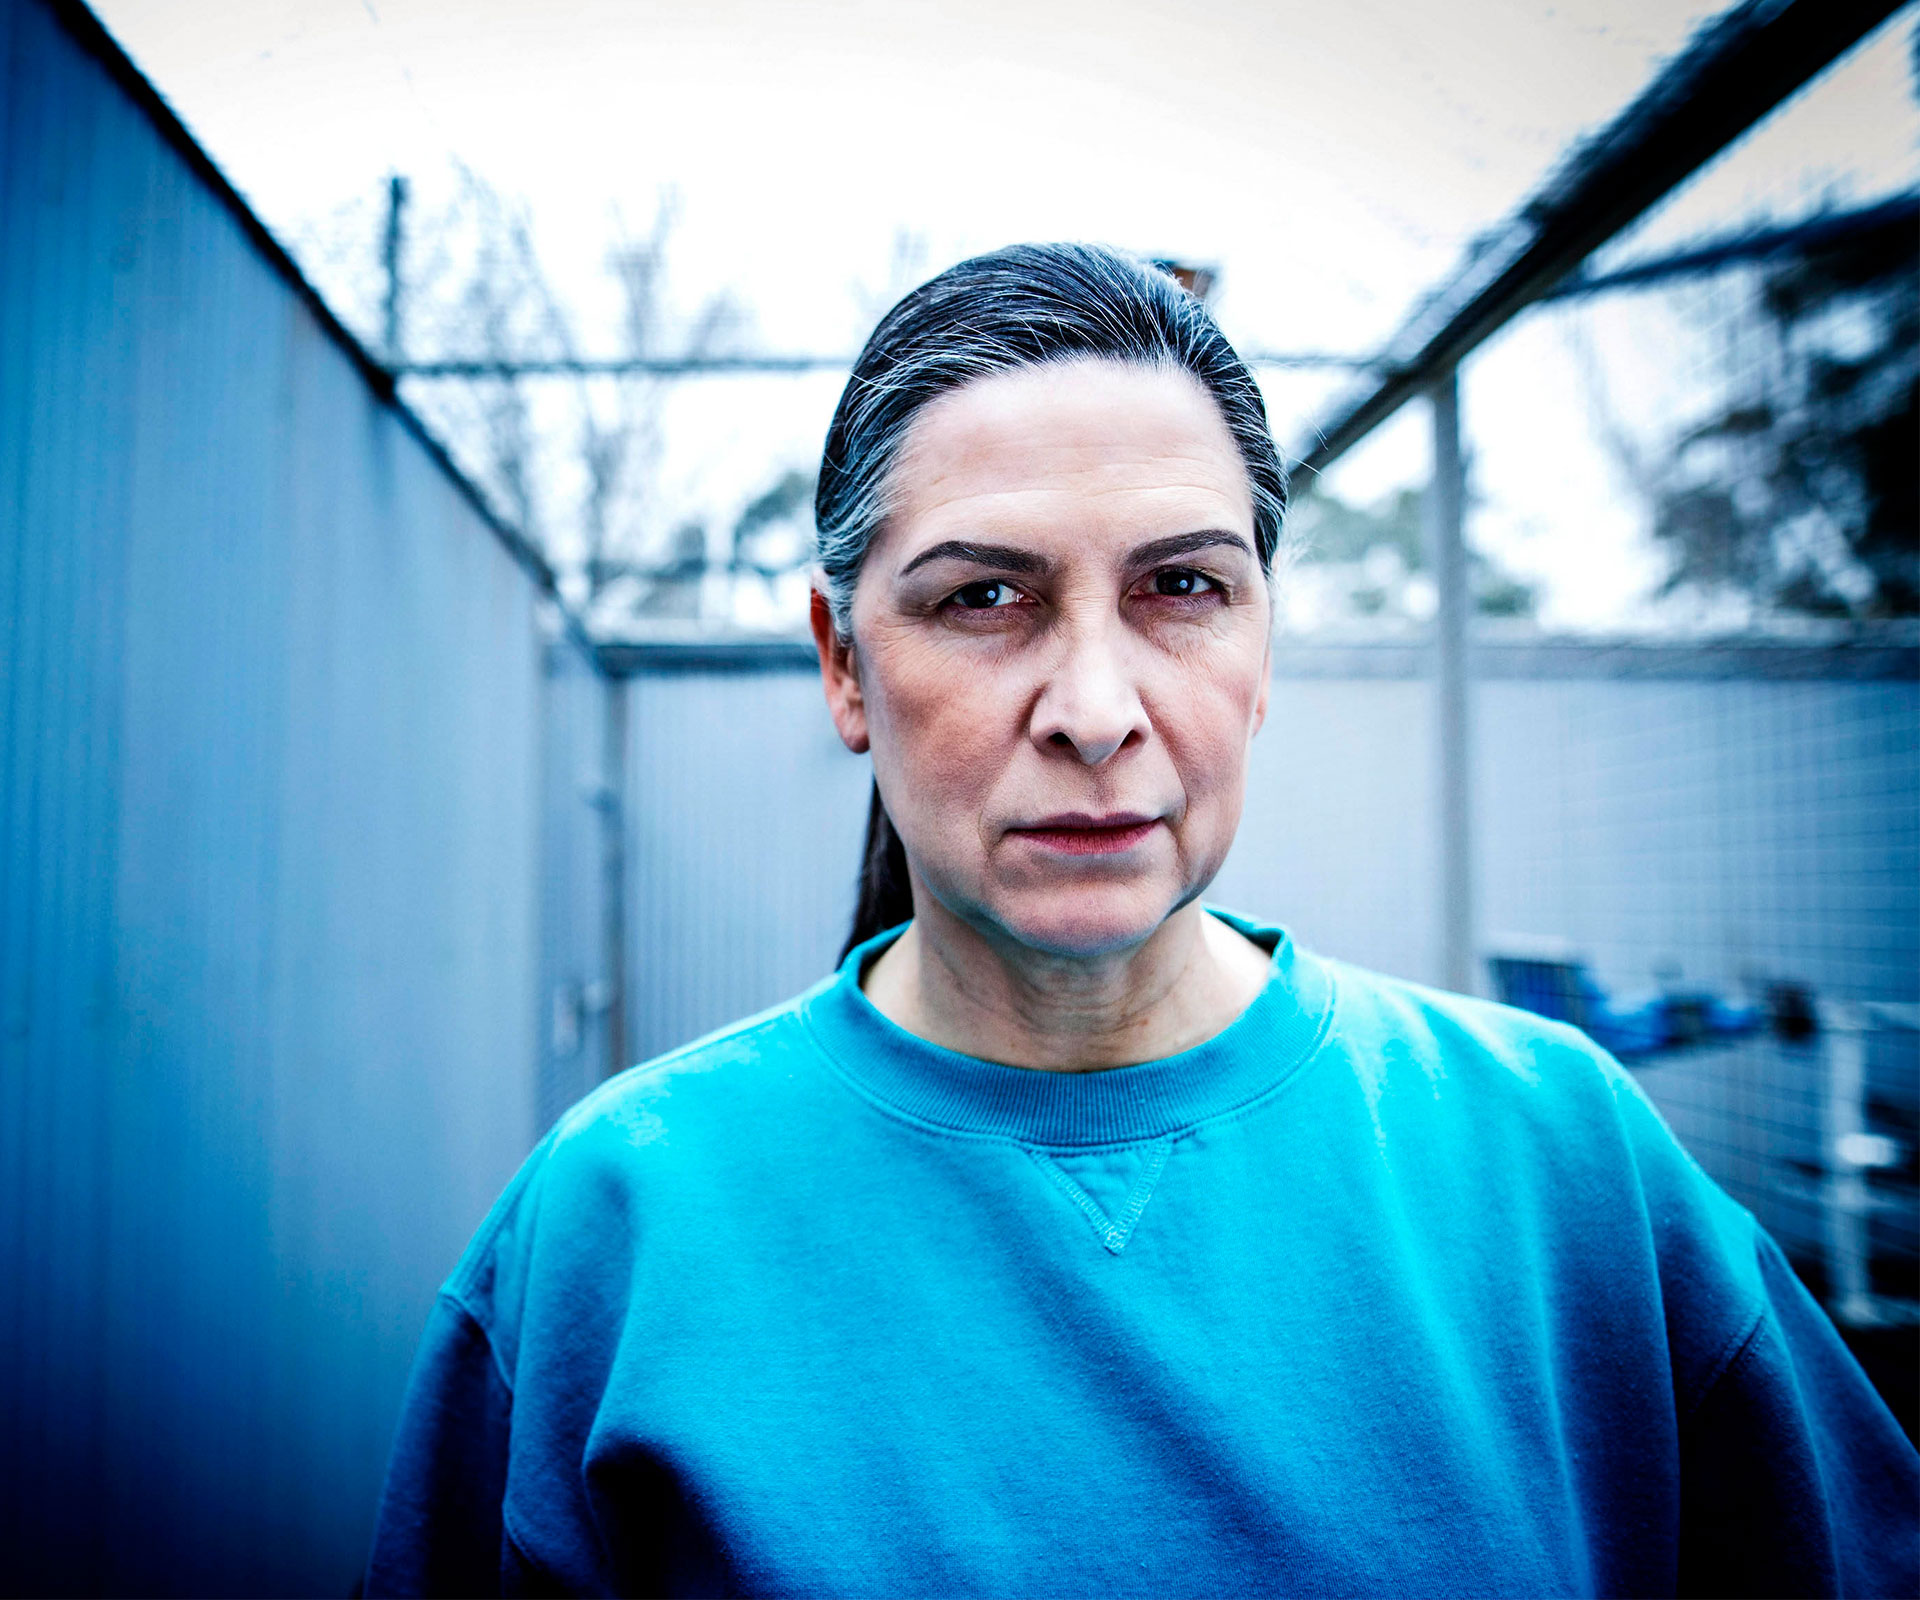 Wentworth’s Pamela Rabe on playing one of TV’s most deliciously dark characters